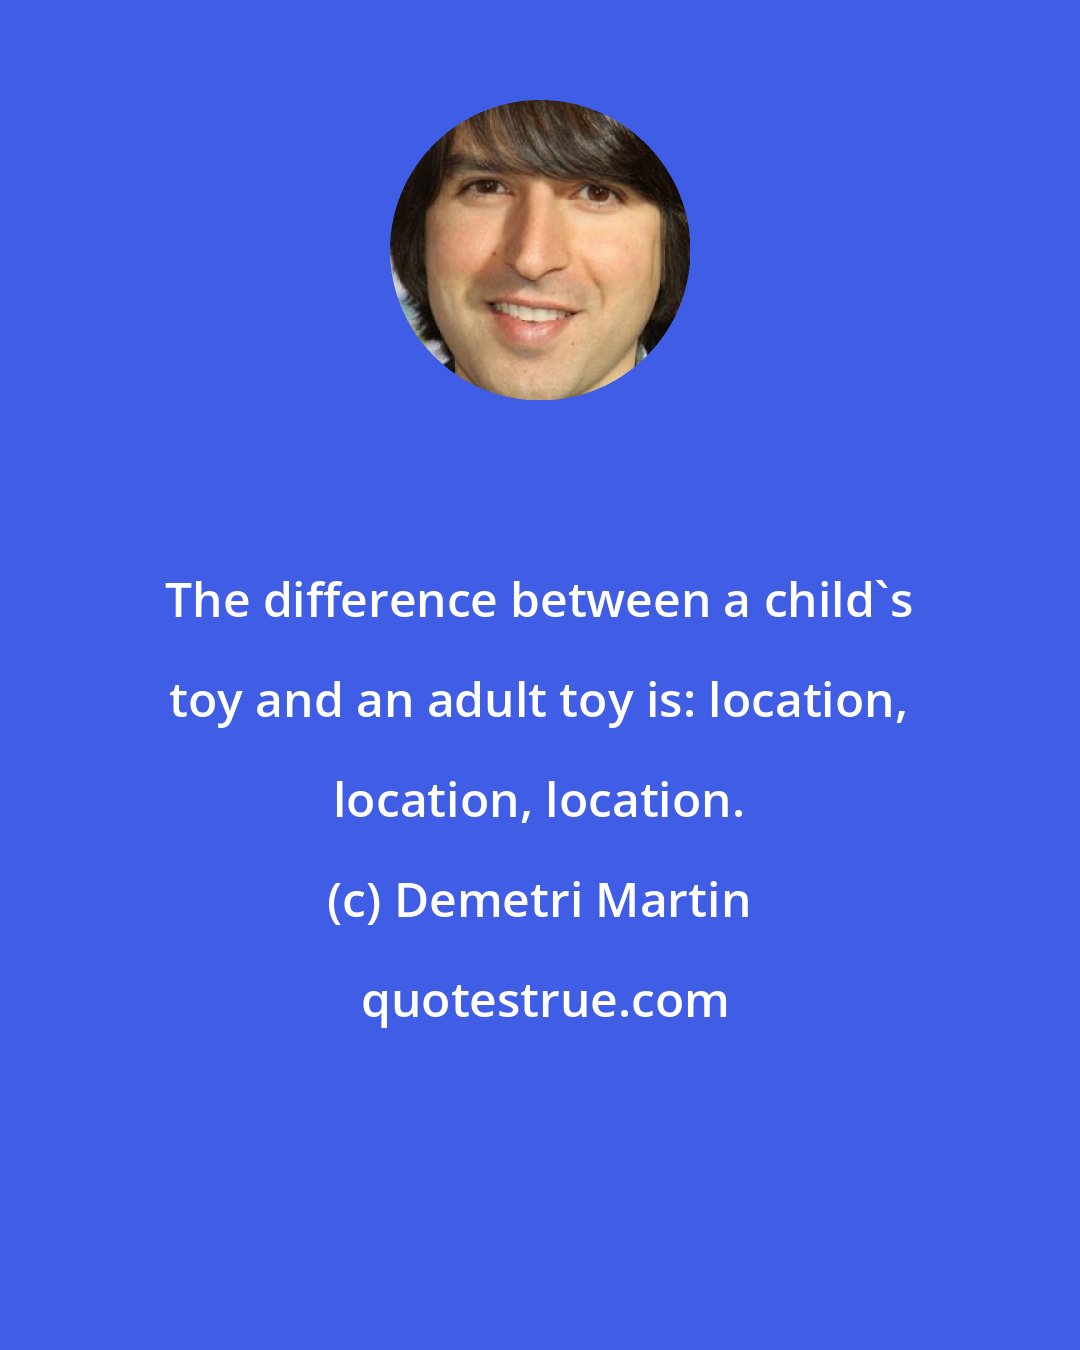 Demetri Martin: The difference between a child's toy and an adult toy is: location, location, location.